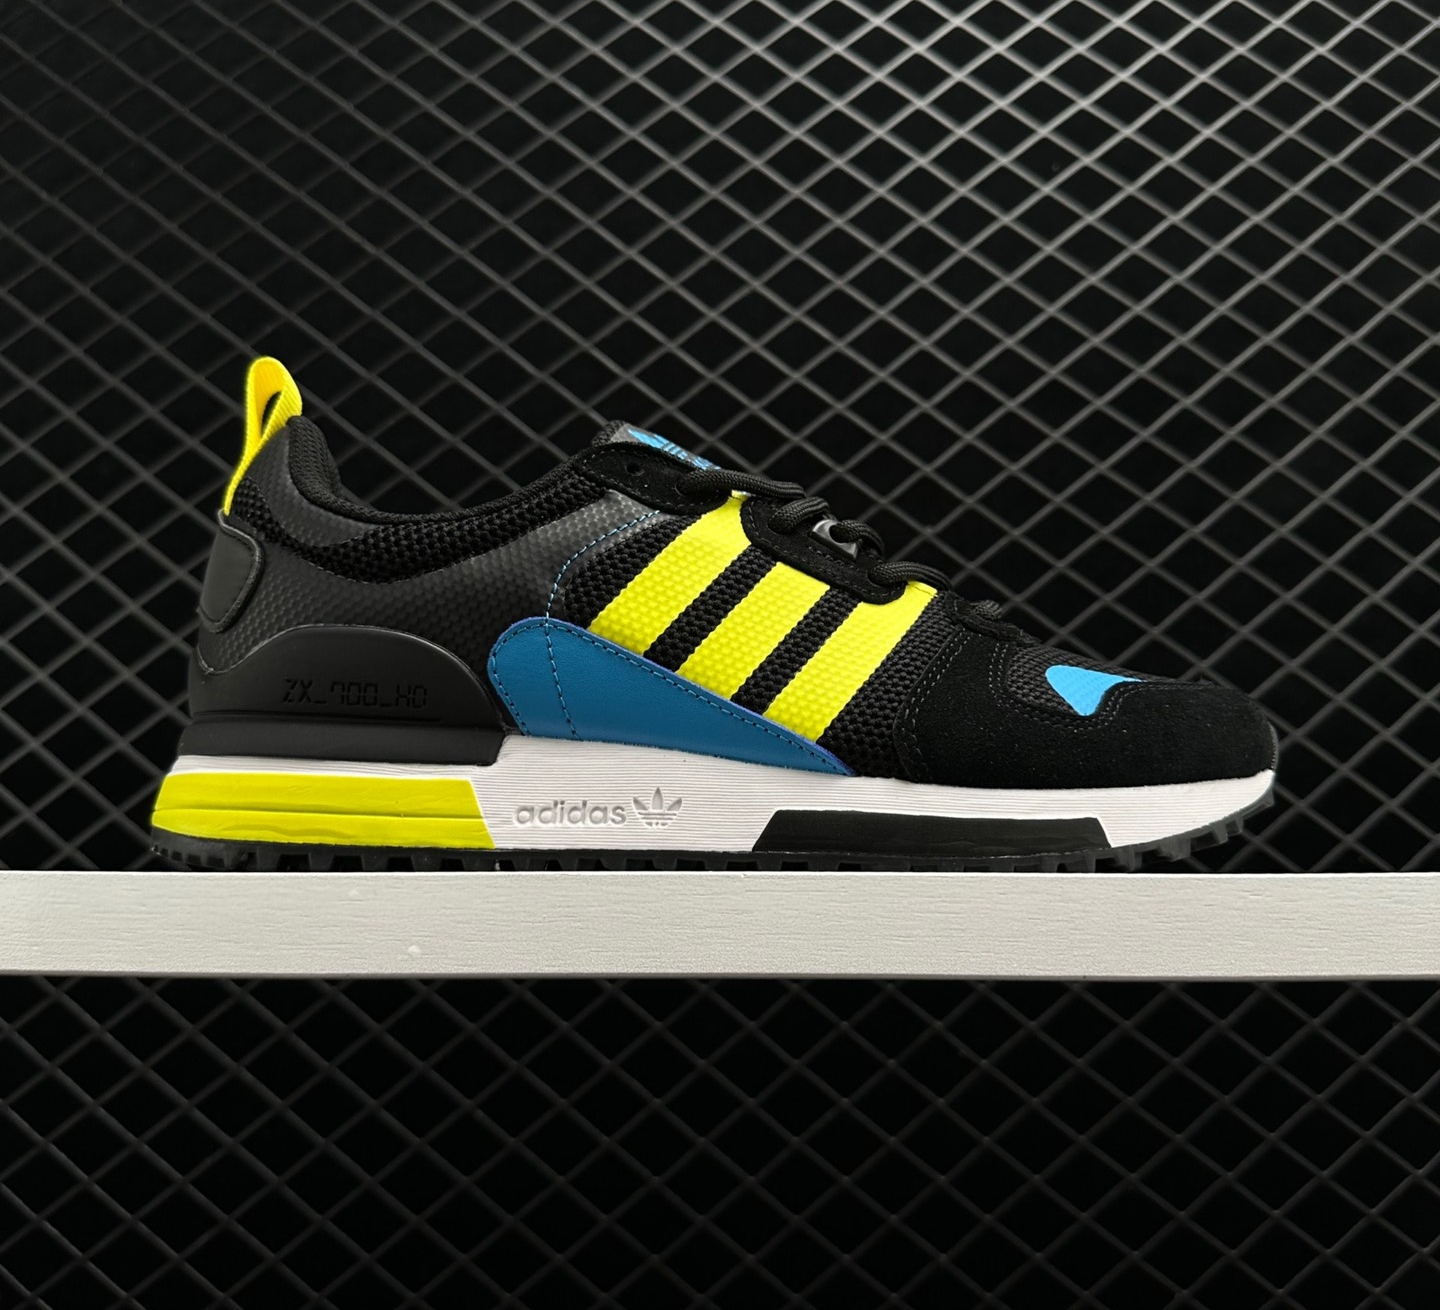 ADIDAS ORIGINALS ZX 700 HD Casual Shoes: Premium Style for Optimal Comfort